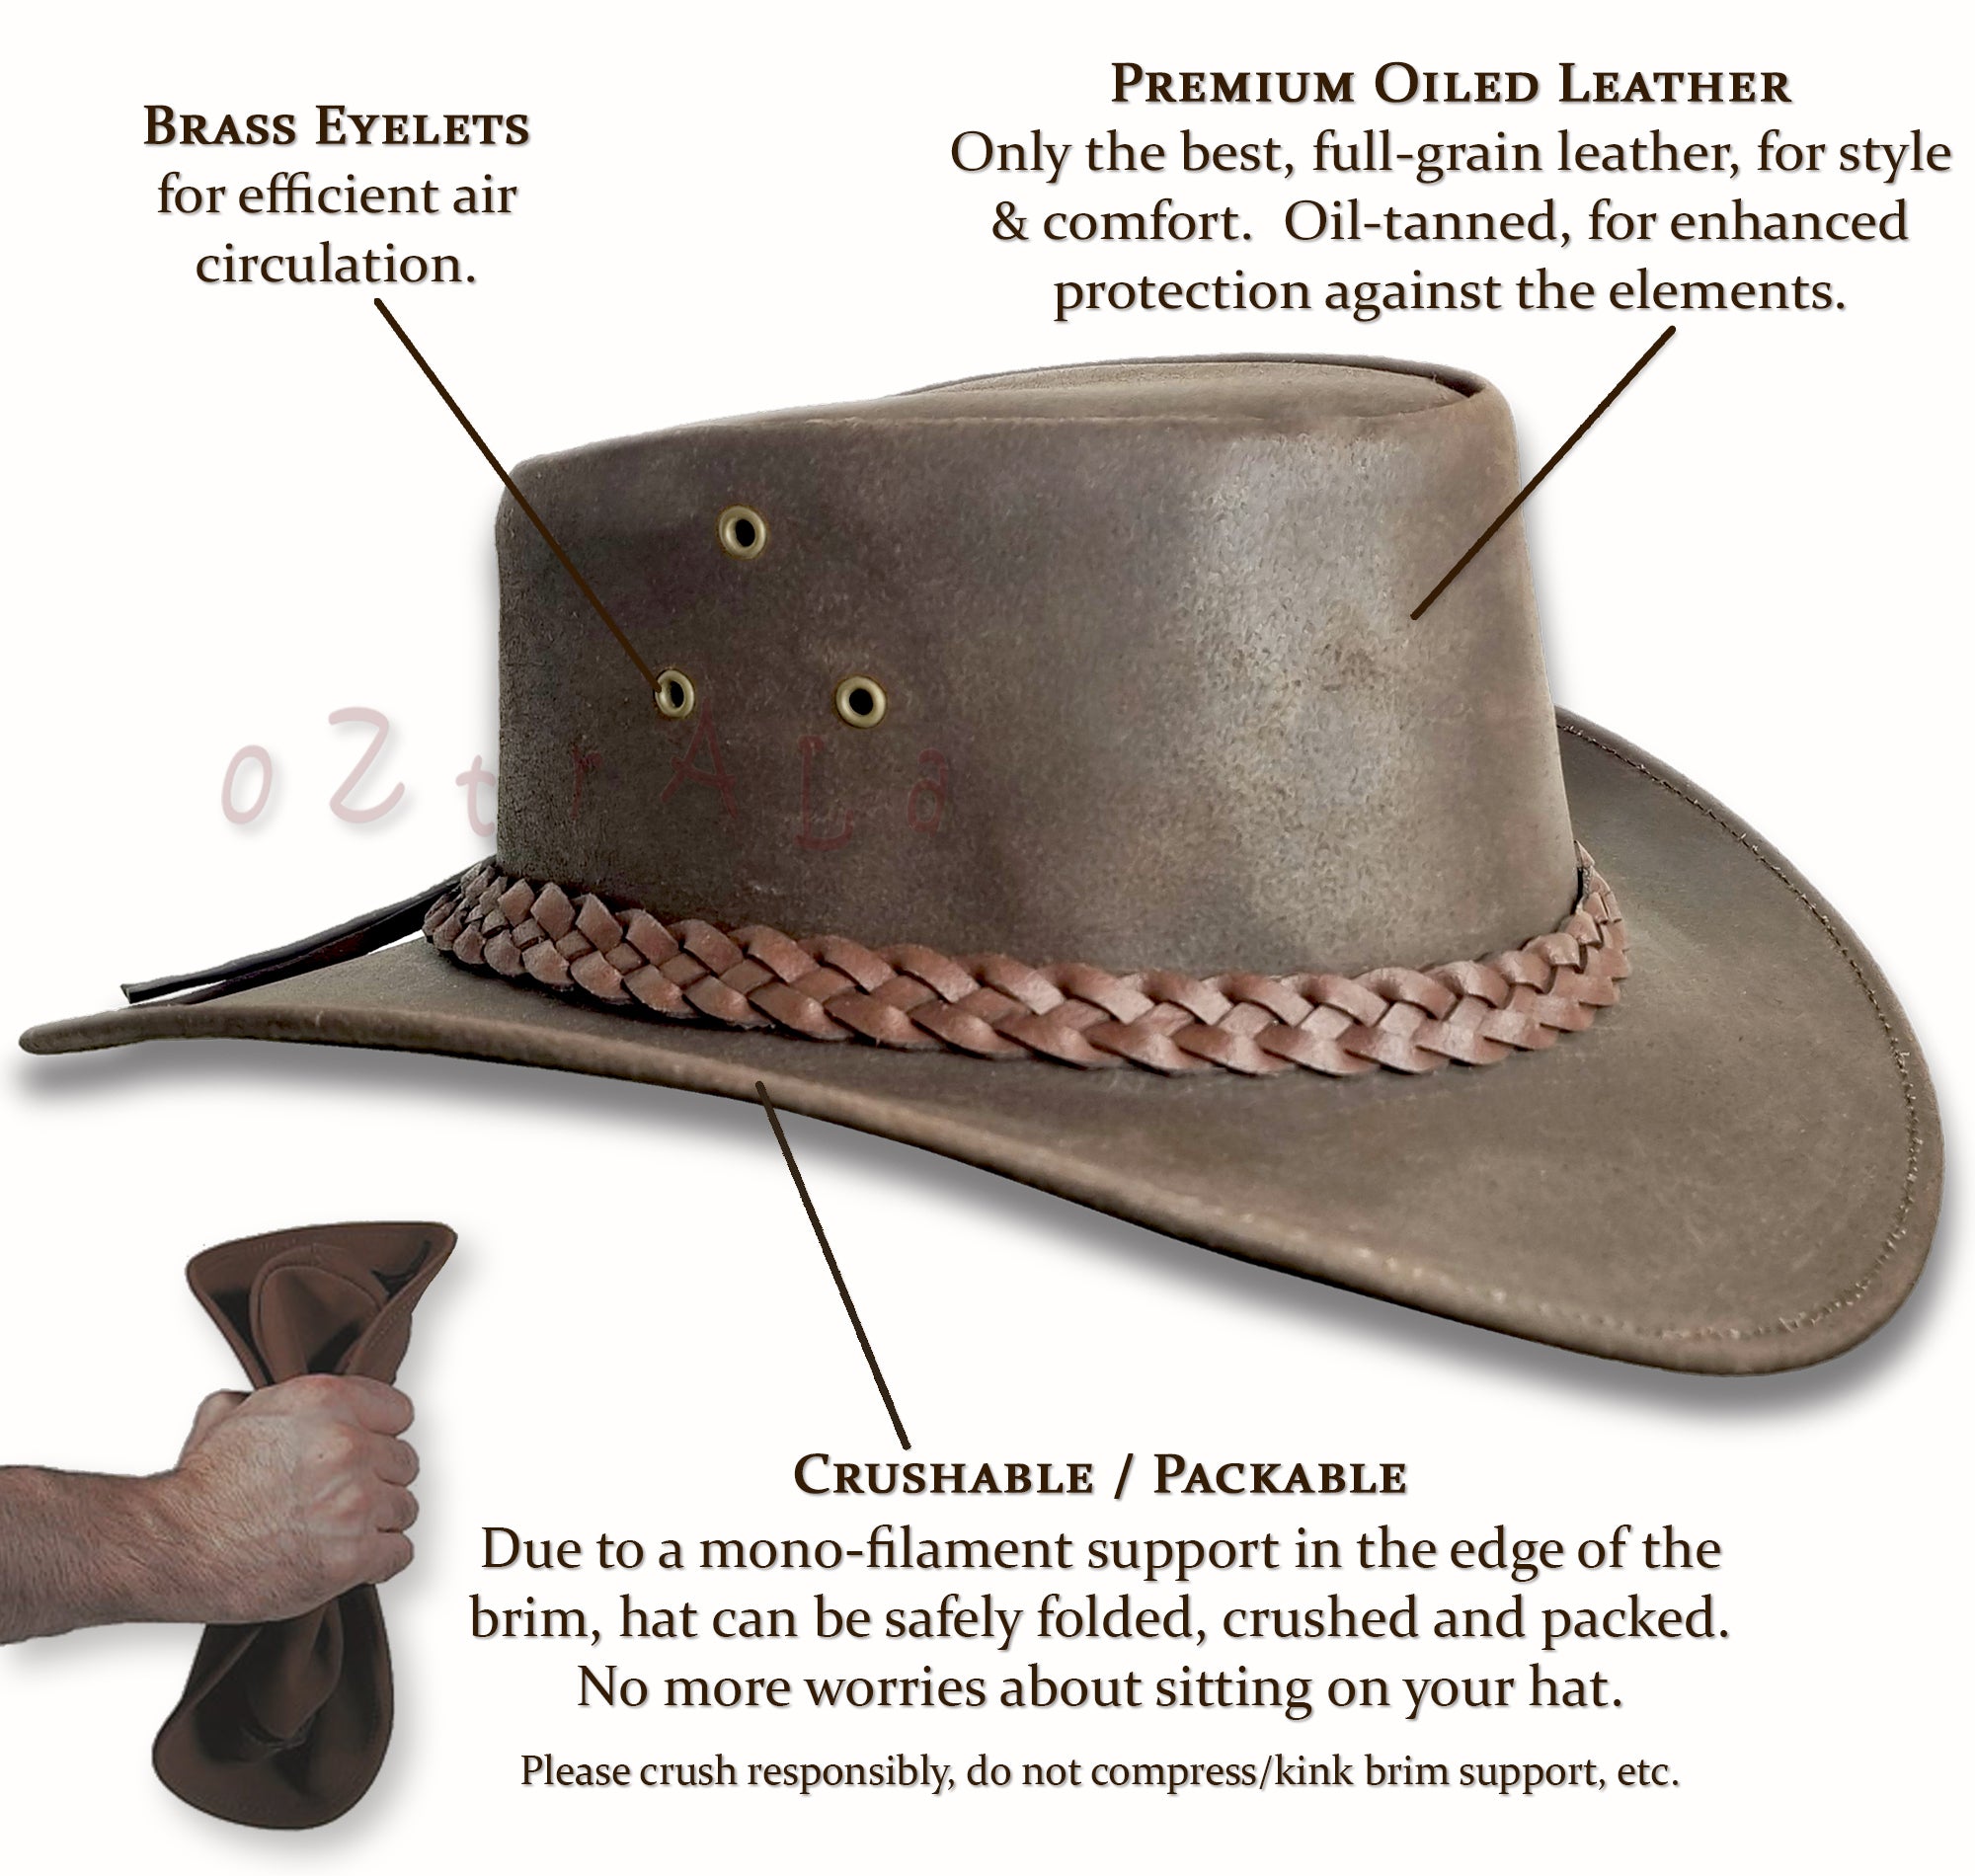 oZtrALa】 Oiled Leather Outback Aussie Western Cowboy M